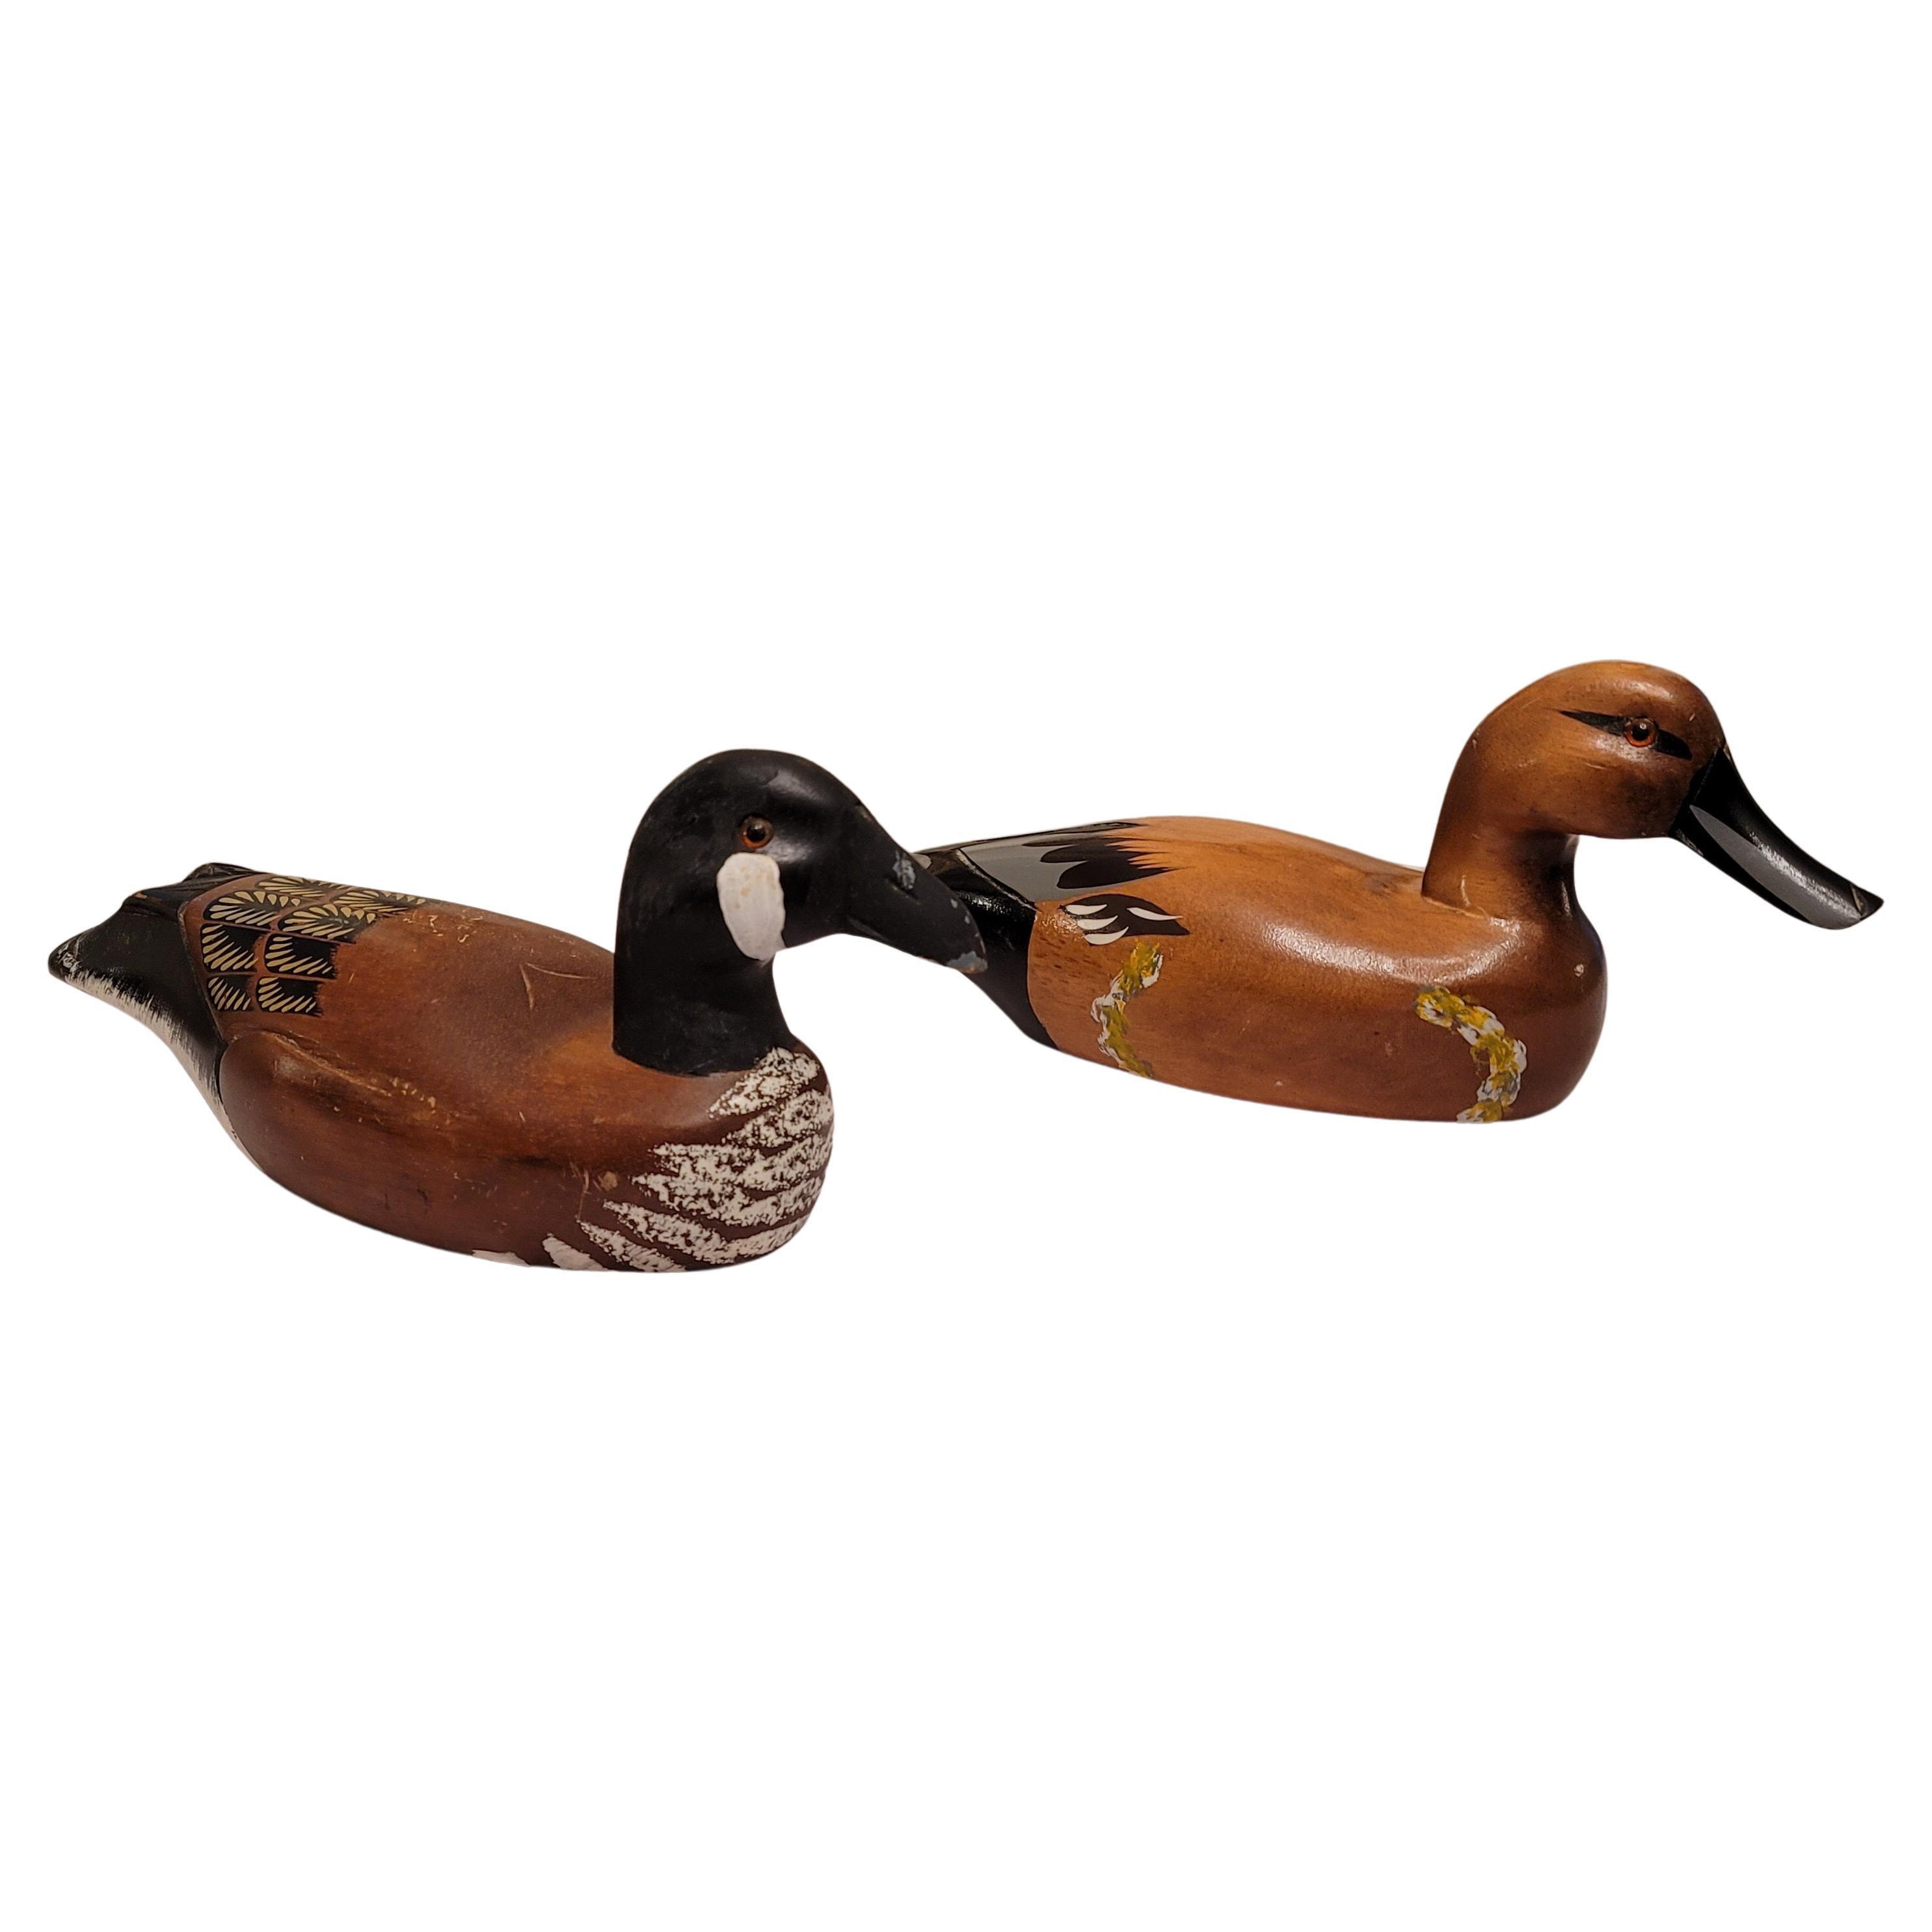 Pair of Vintage American Handmade and Painted Duck Decoys For Sale